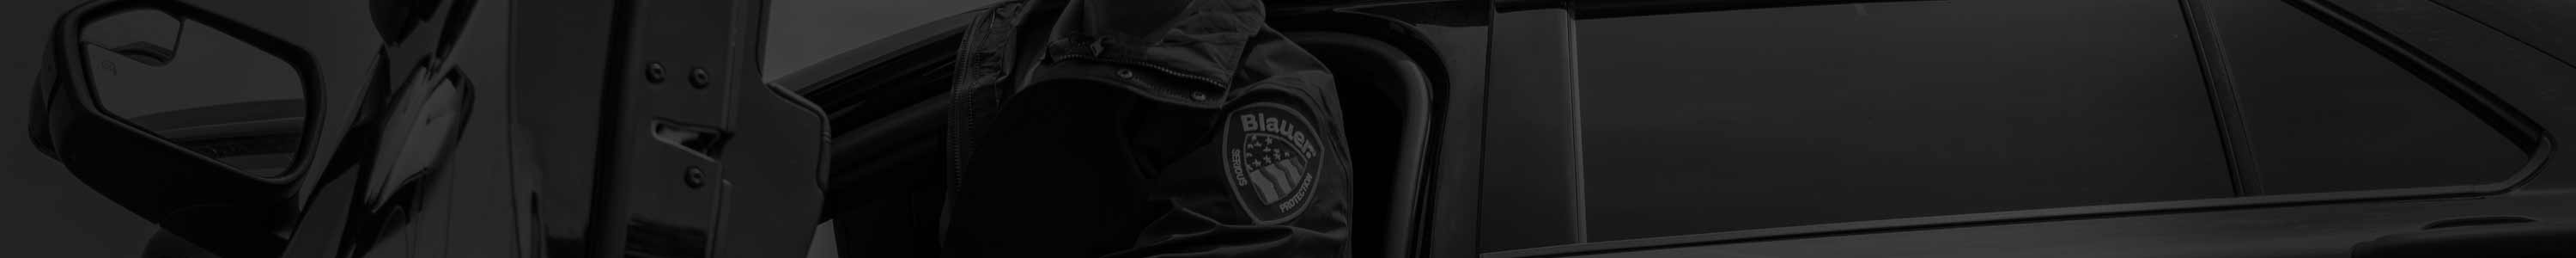 Security Guard Jackets by Blauer